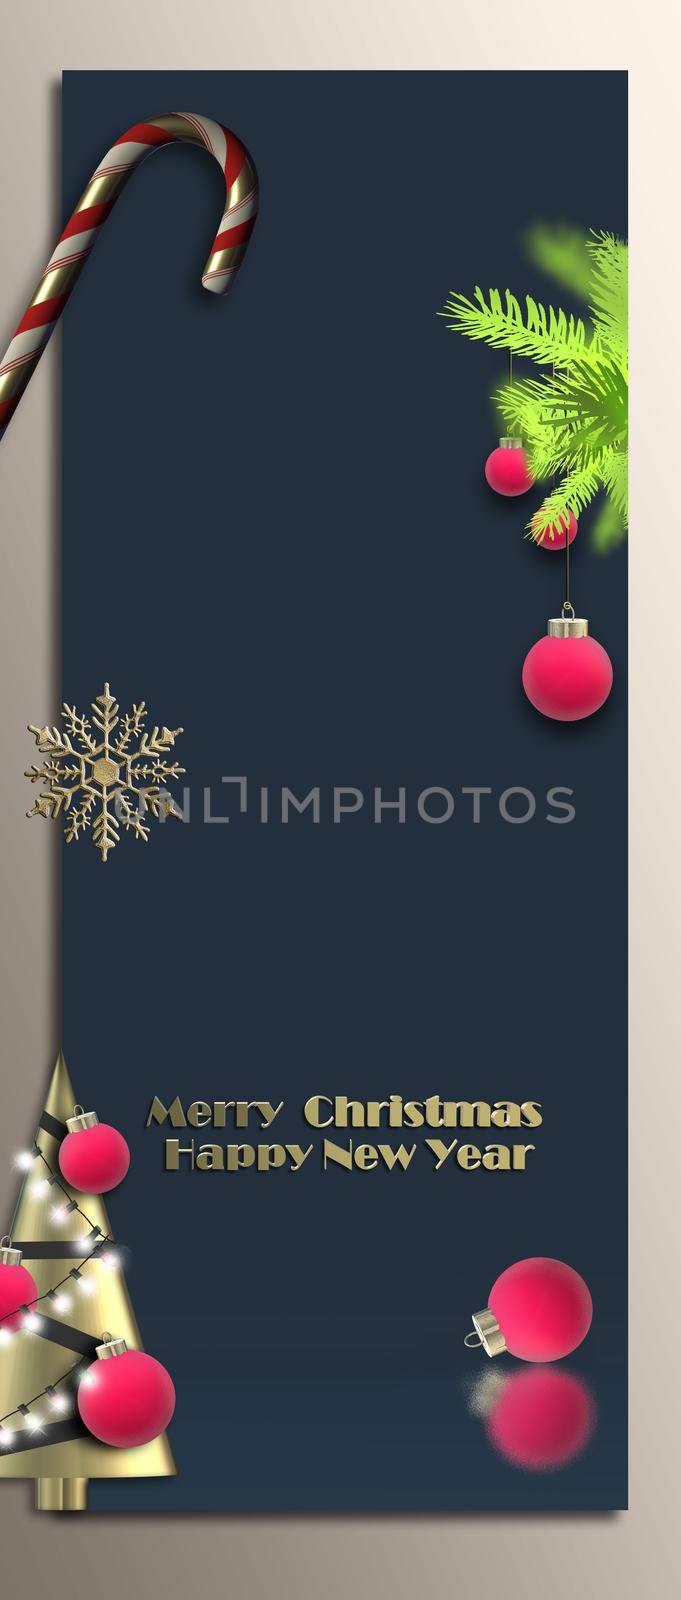 Christmas New Year vertical poster, menu, template on dark blue. Xmas tree branches, Christmas tree with baubles. Gold text Merry Christmas Happy New Year. Place for text, copy space. 3D illustration